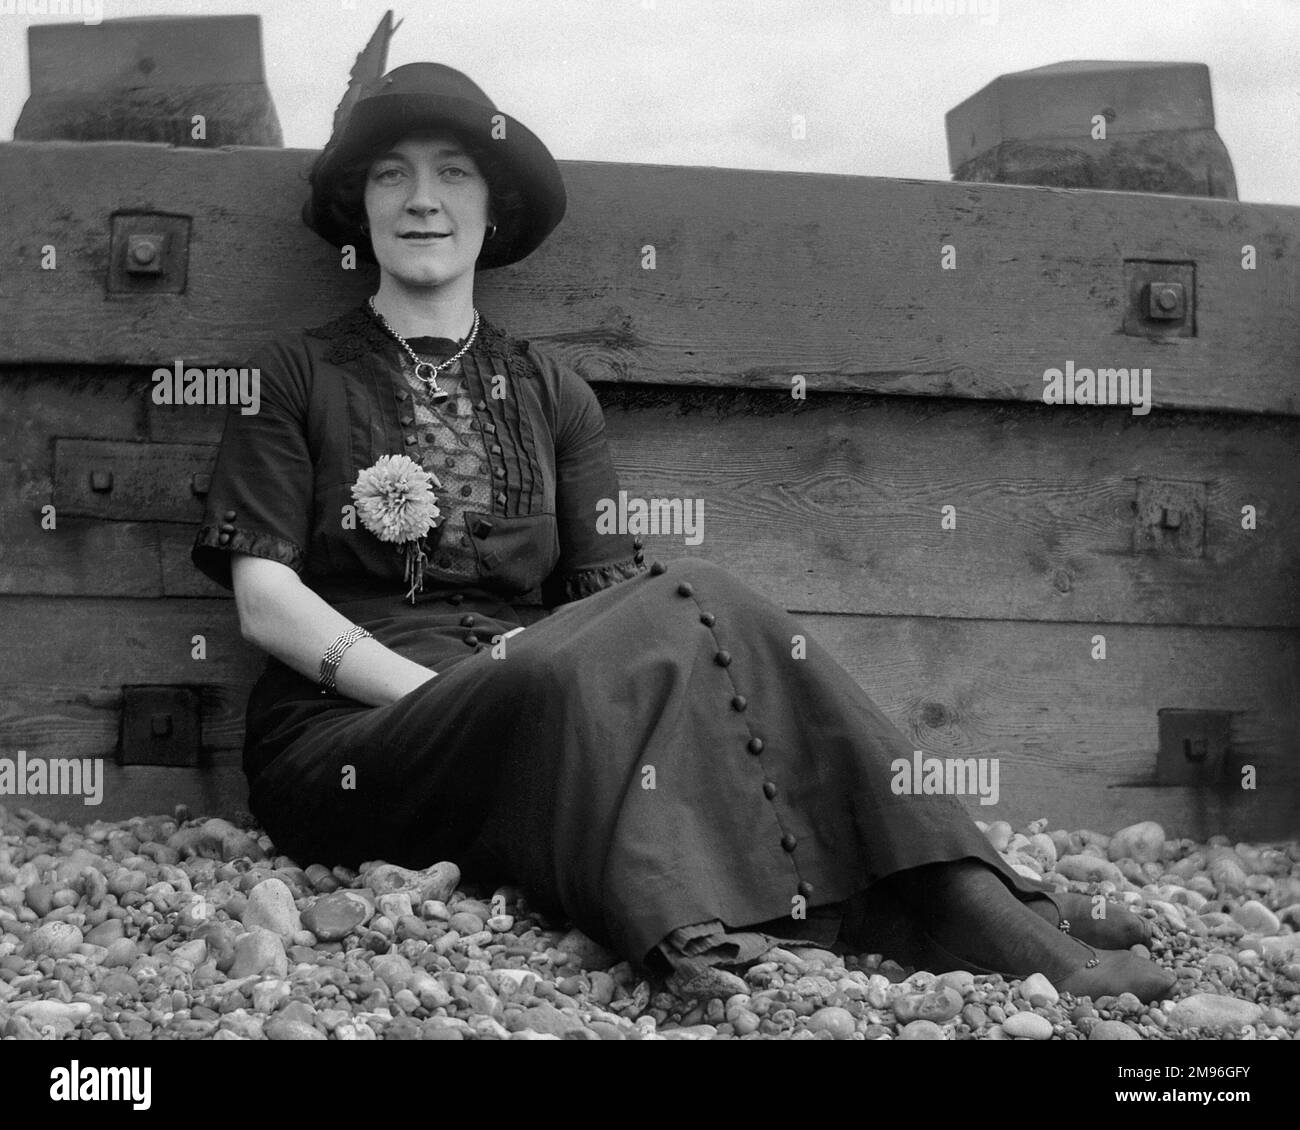 1920s beach woman Black and White Stock Photos & Images - Alamy